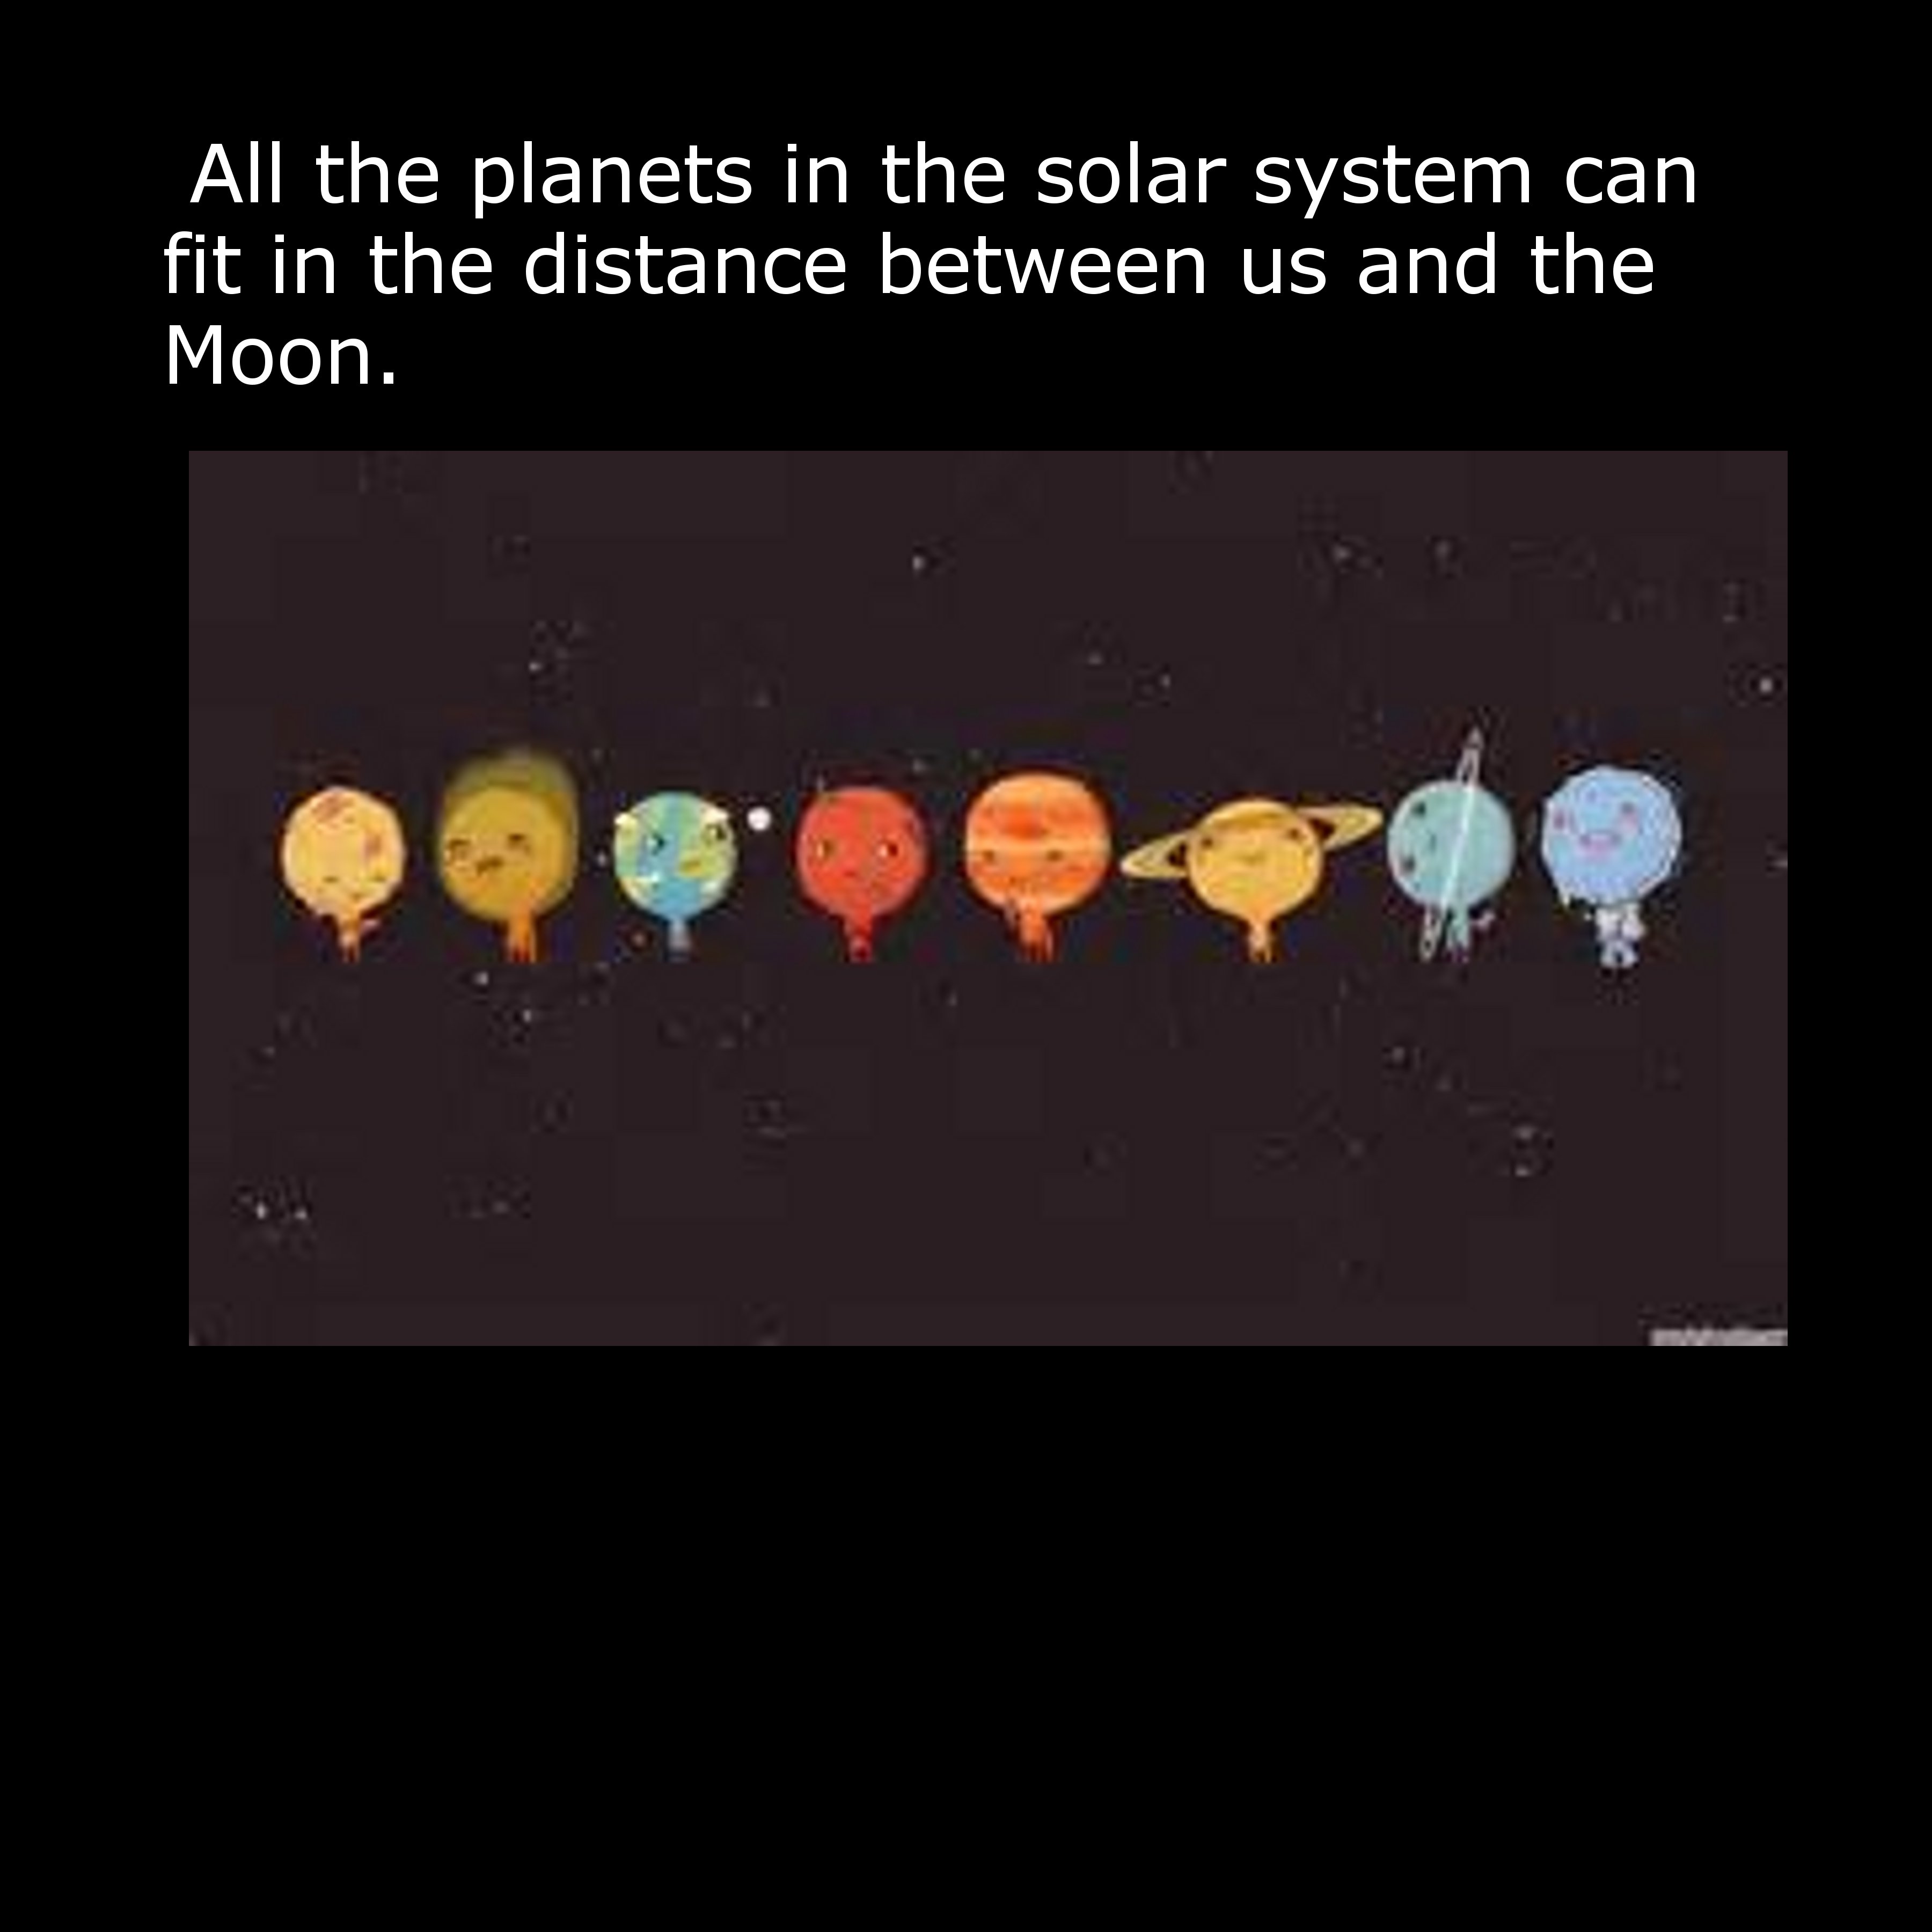 planet - All the planets in the solar system can fit in the distance between us and the Moon.